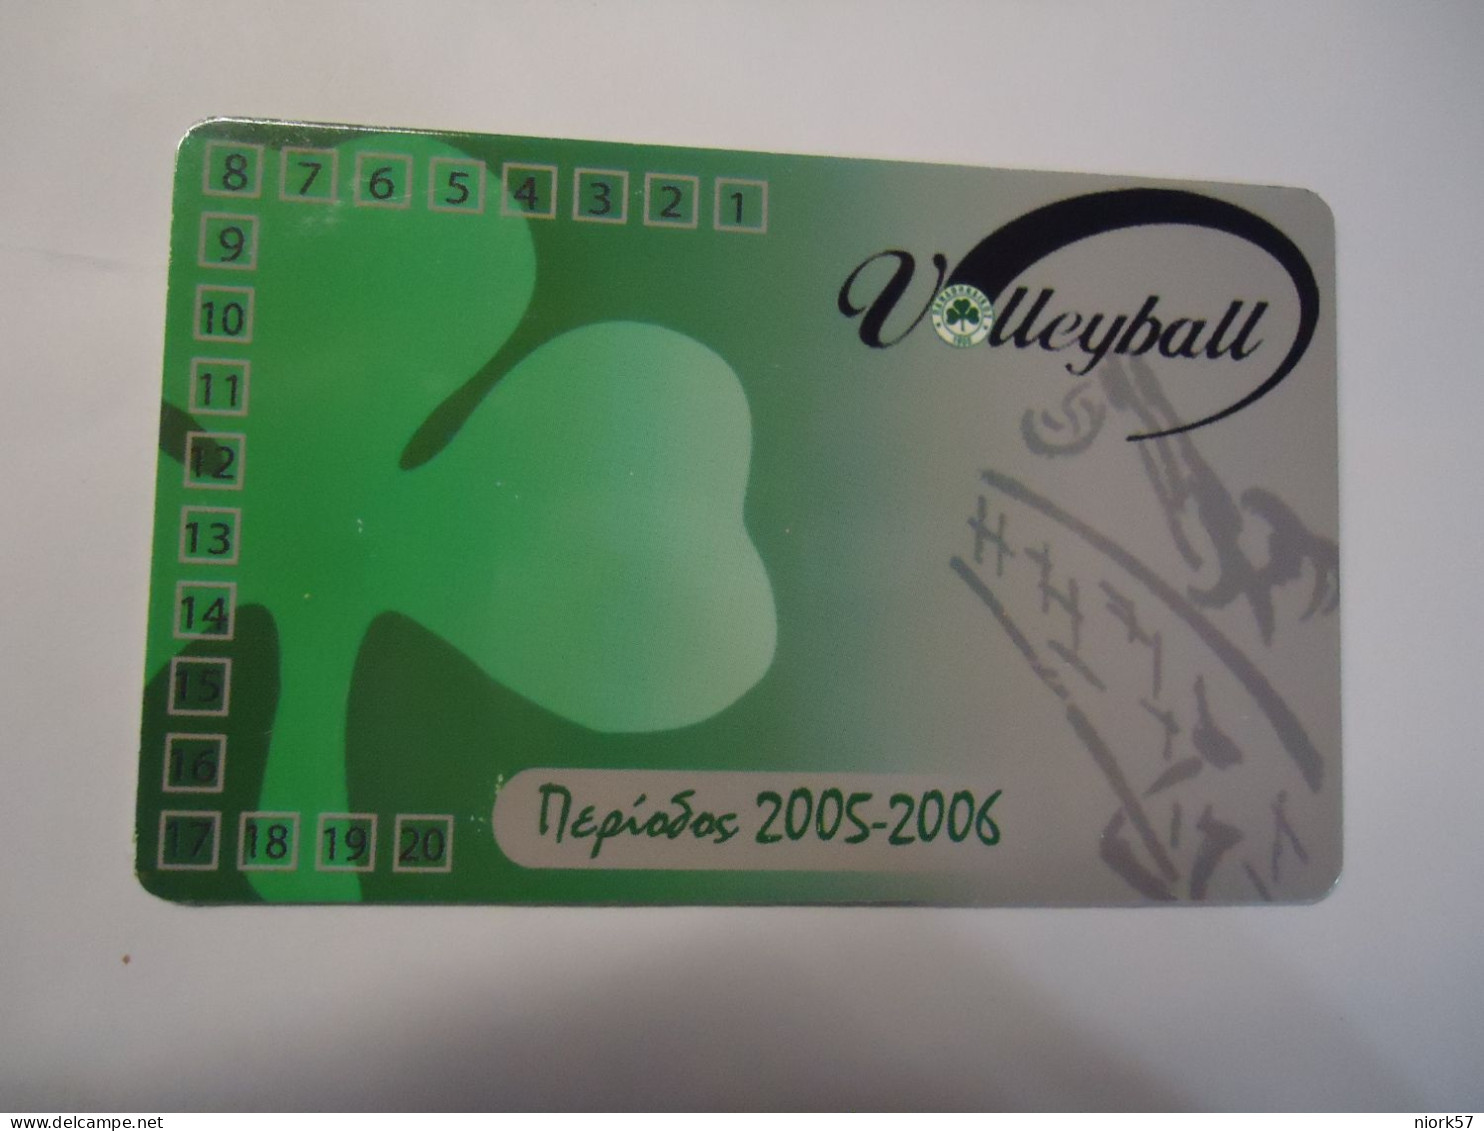 GREECE USED   CARDS   SPORTS VOLLEYBALL  Π.Α.Ε ΠΑΟ ΠΑΝΑΘΗΝΑΙΚΟΣ - Sport